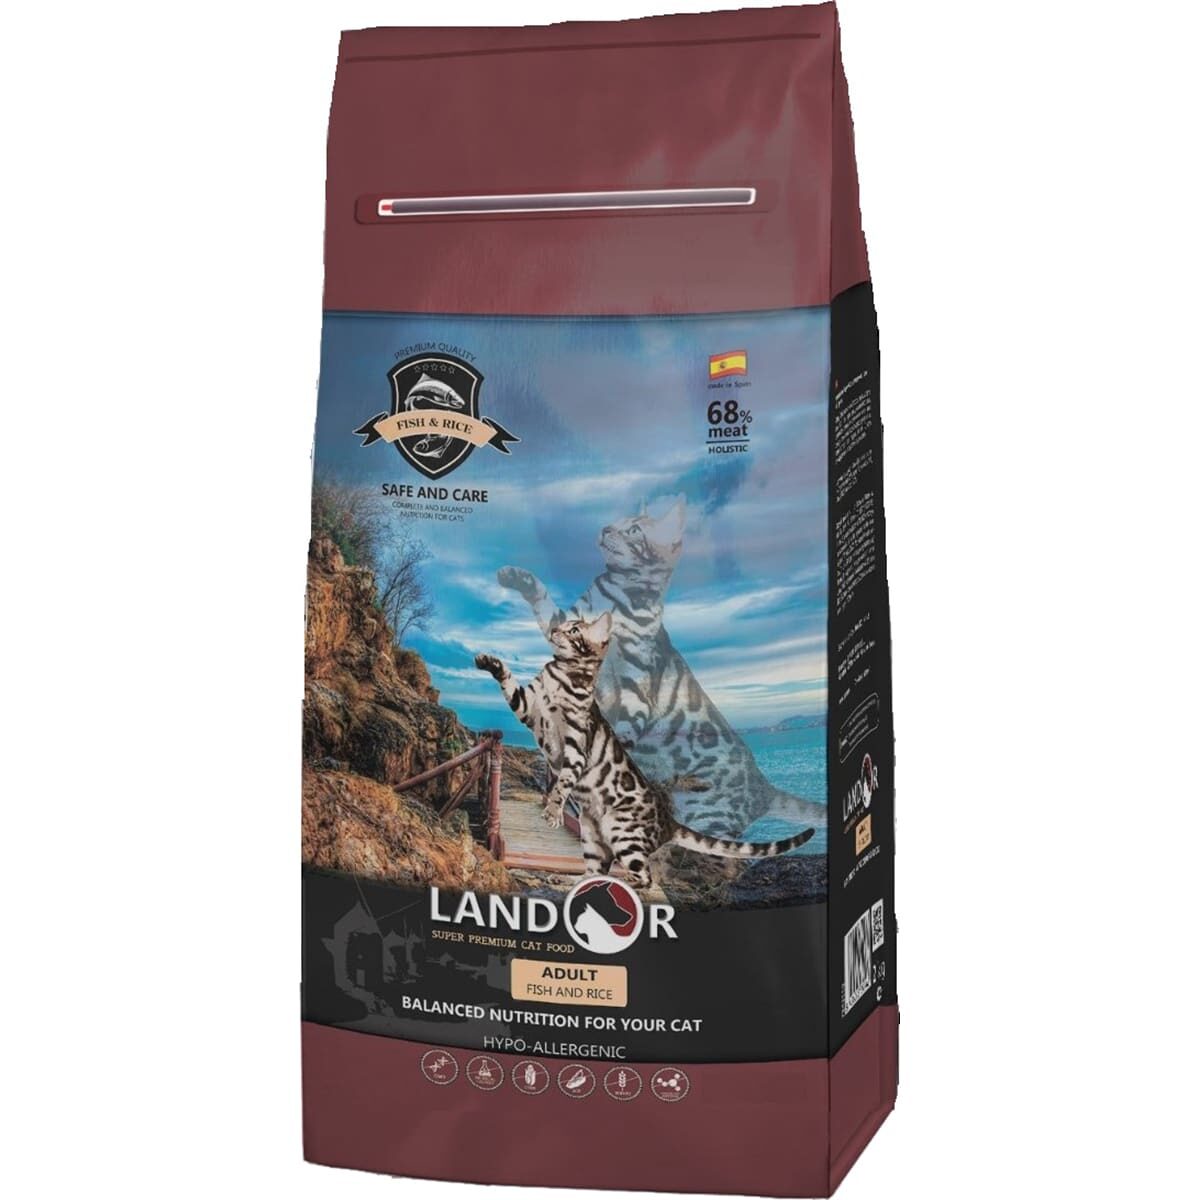 Landor Adult cat with fish and rice